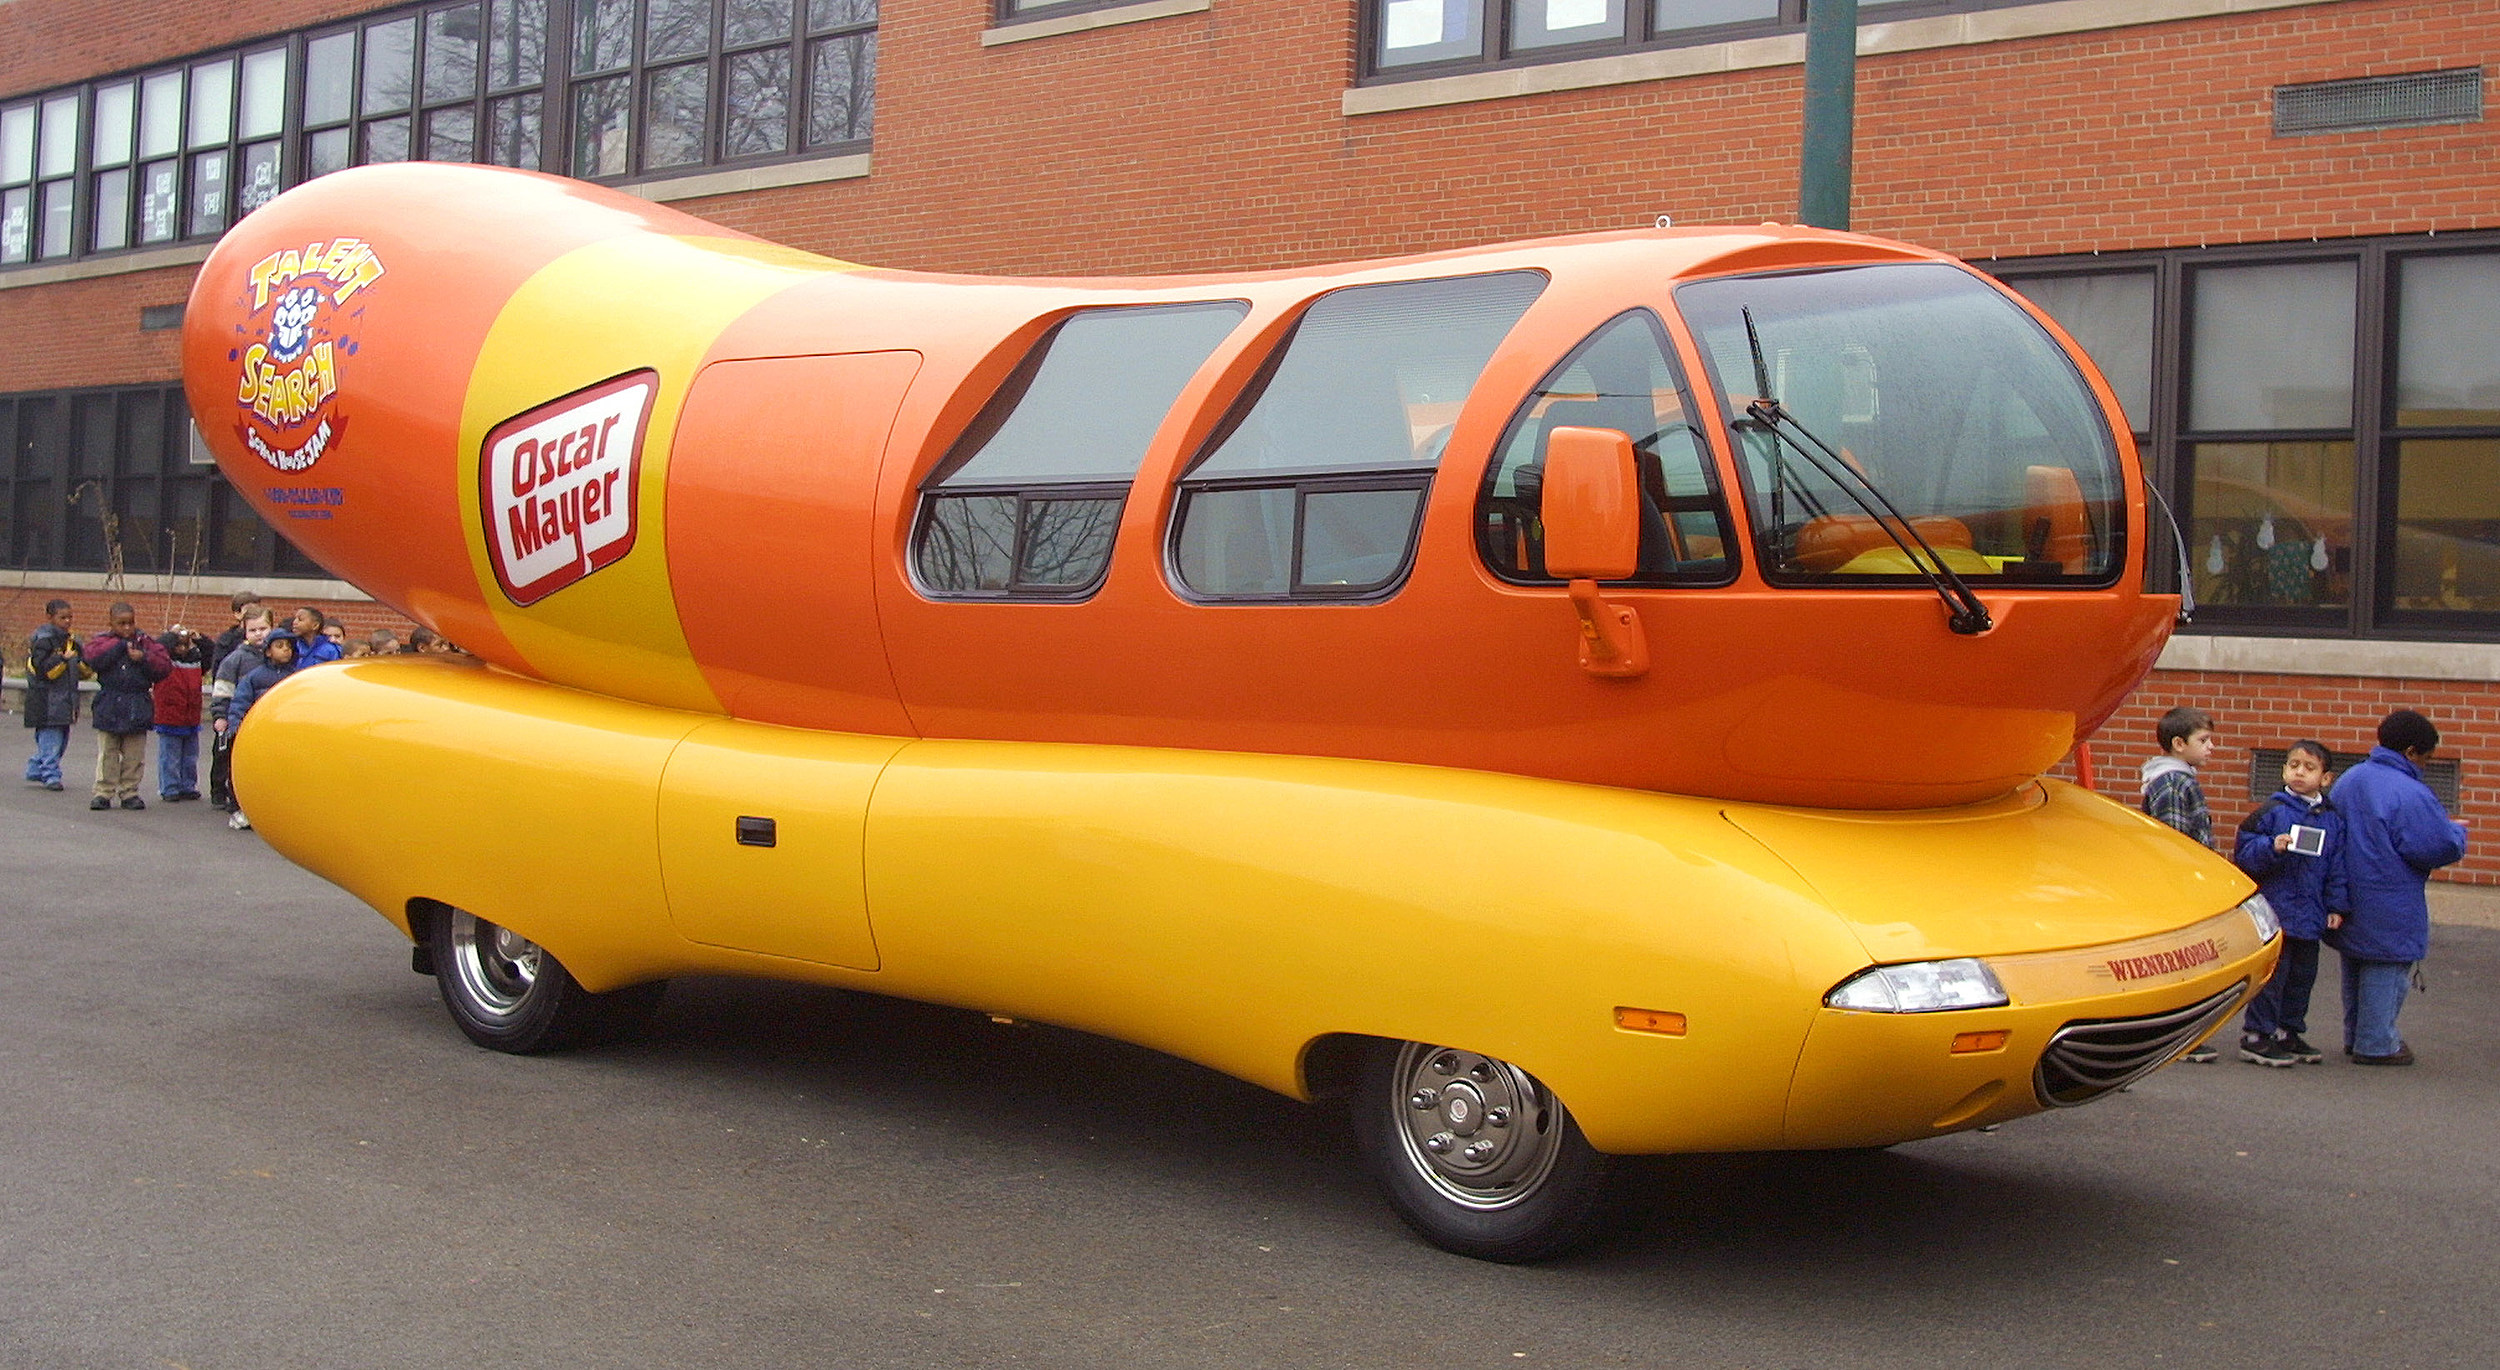 Oscar Mayer ‘Weinermobile’ To Appear At Albany Devils Game Tonight